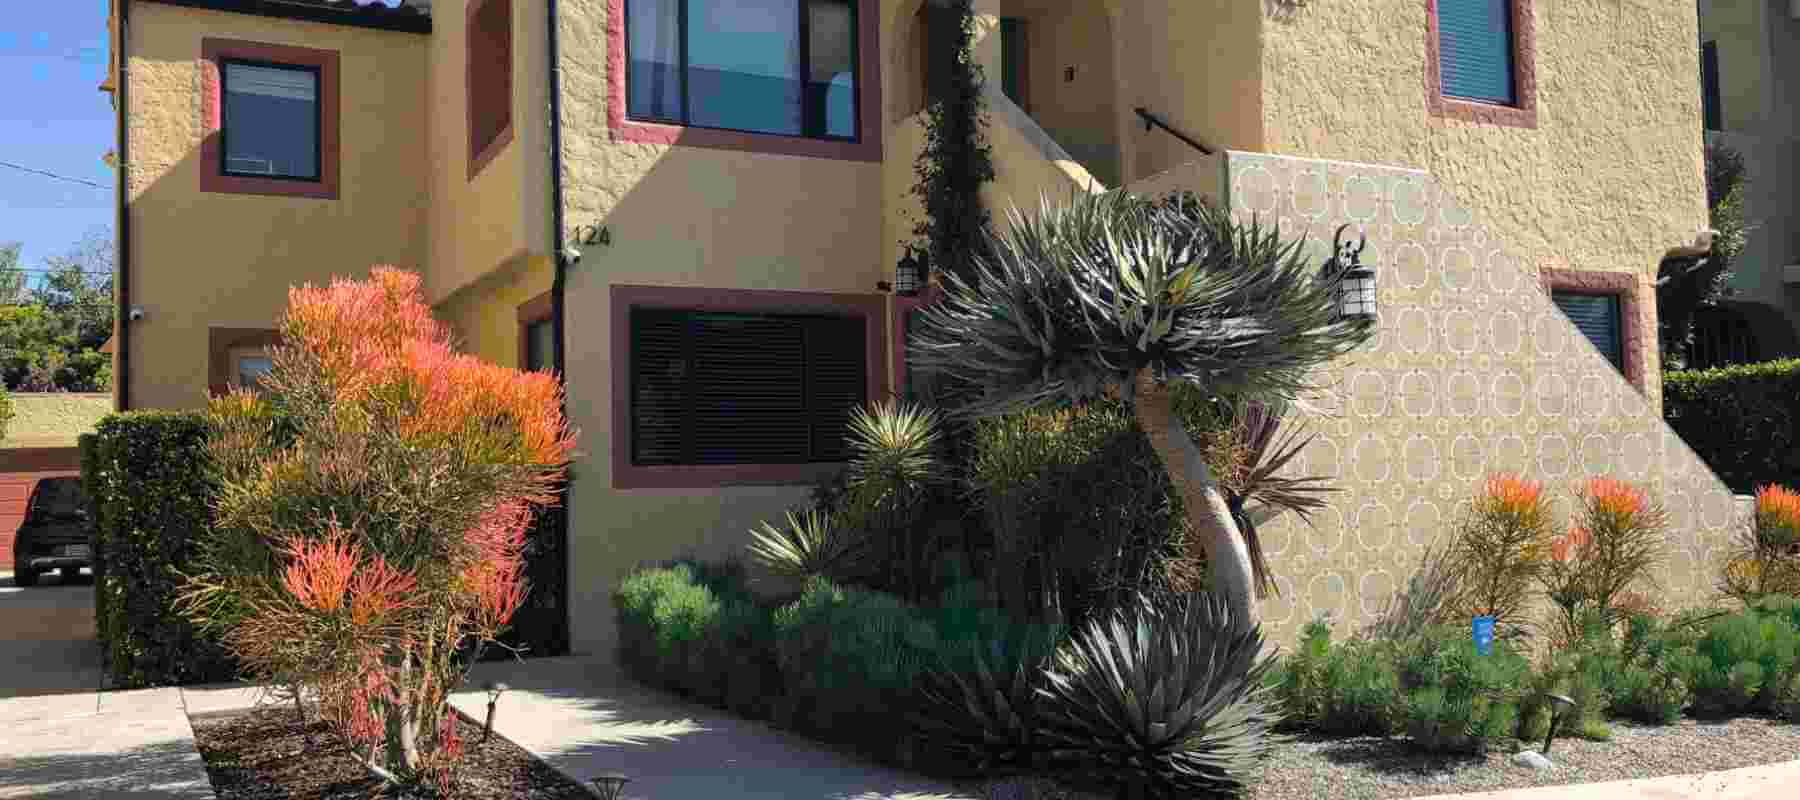 image of a front of a yellow stucco home with a front yard filled with agaves and other succulents